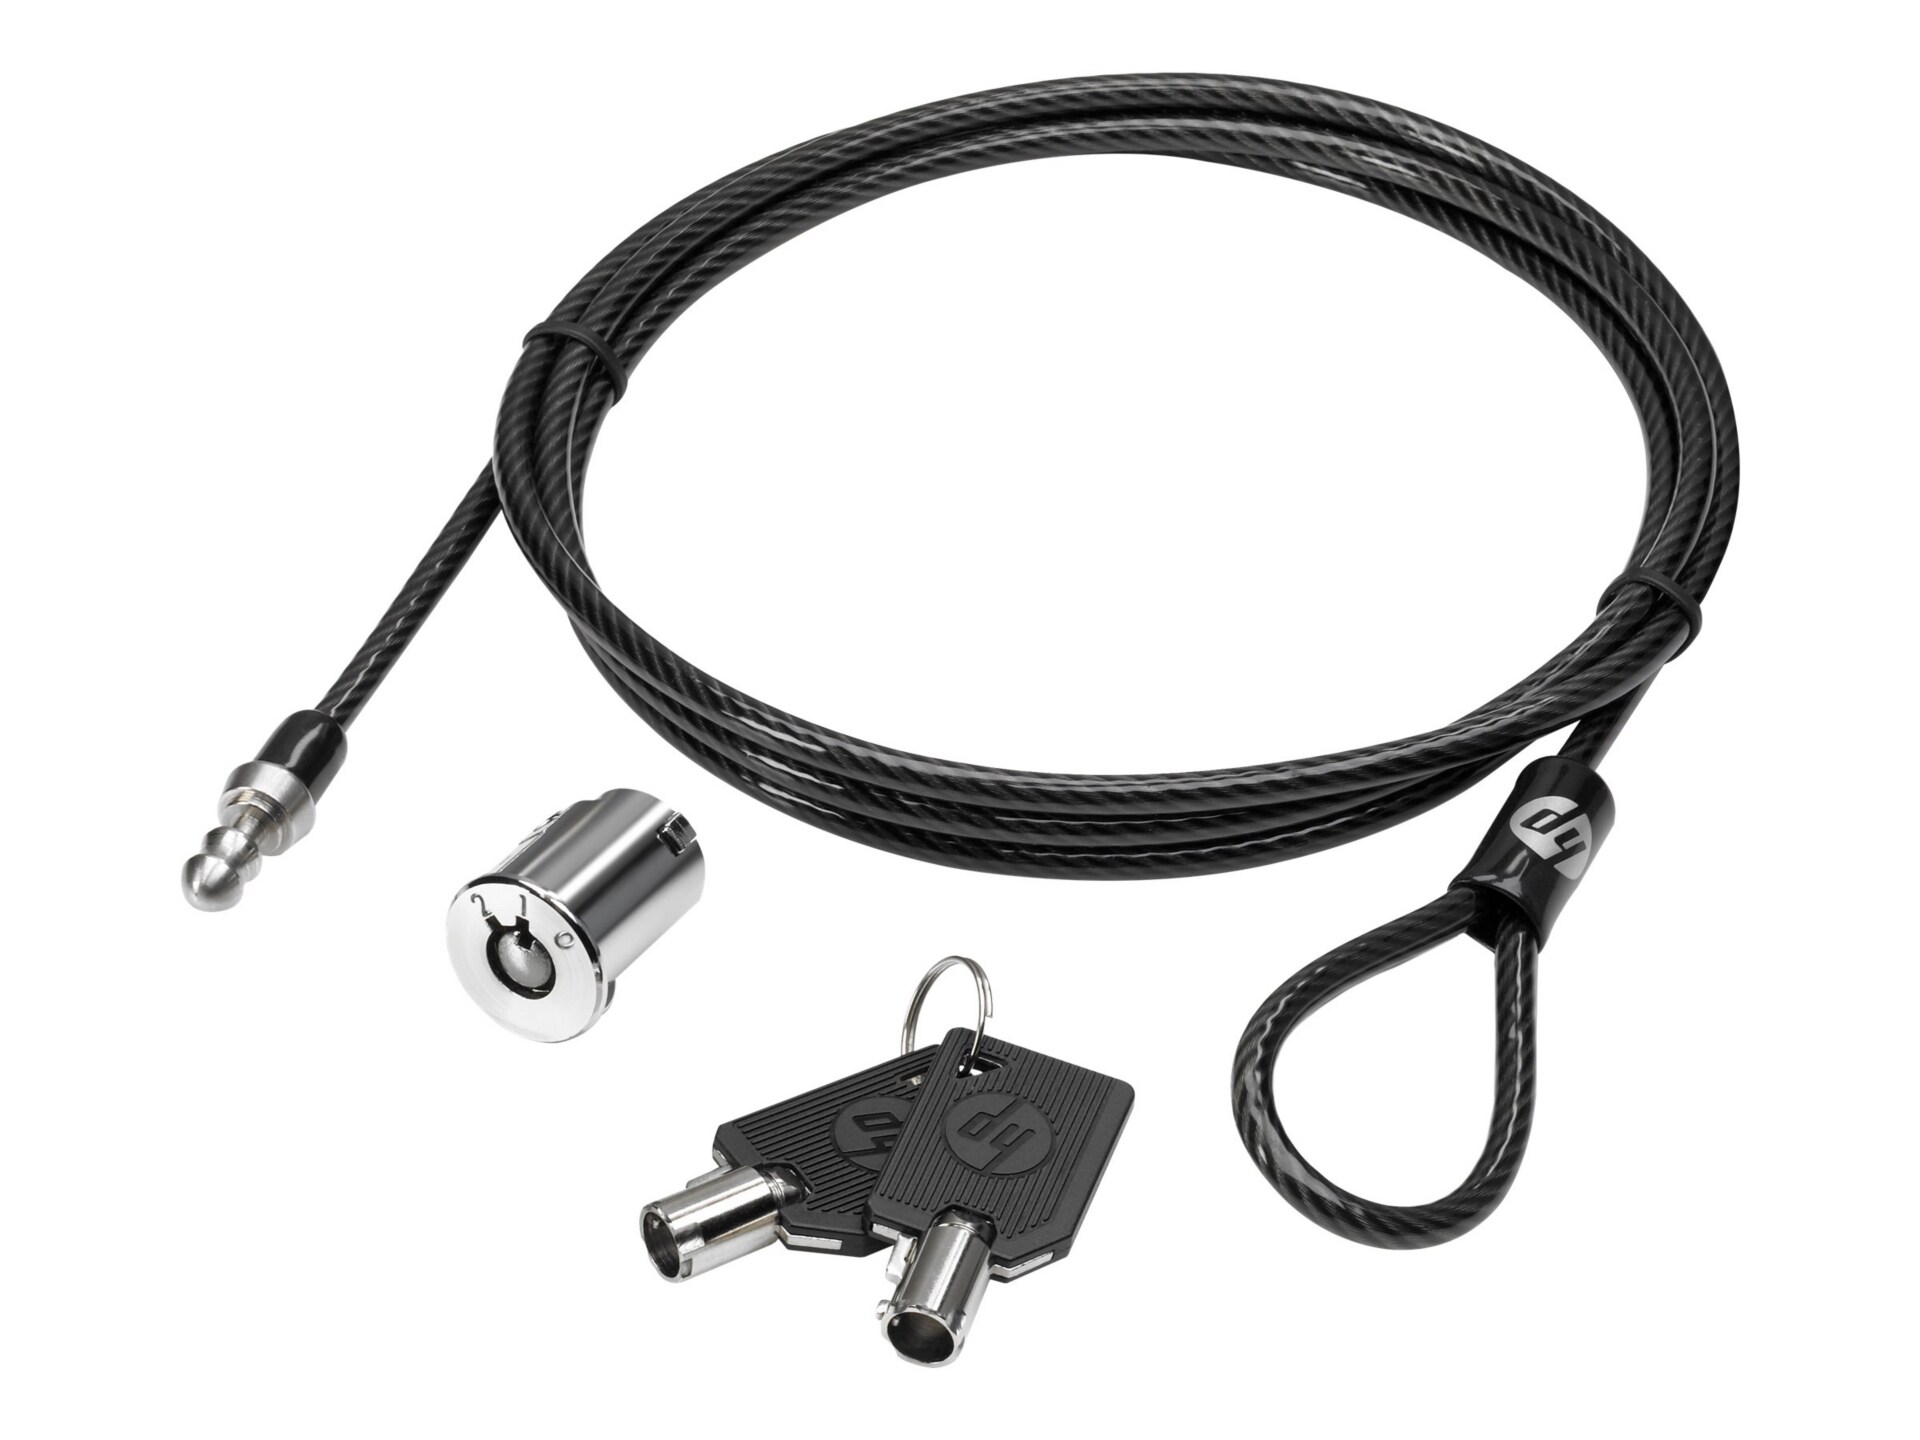 HP Master Keyed Docking Station Cable Lock - security cable lock